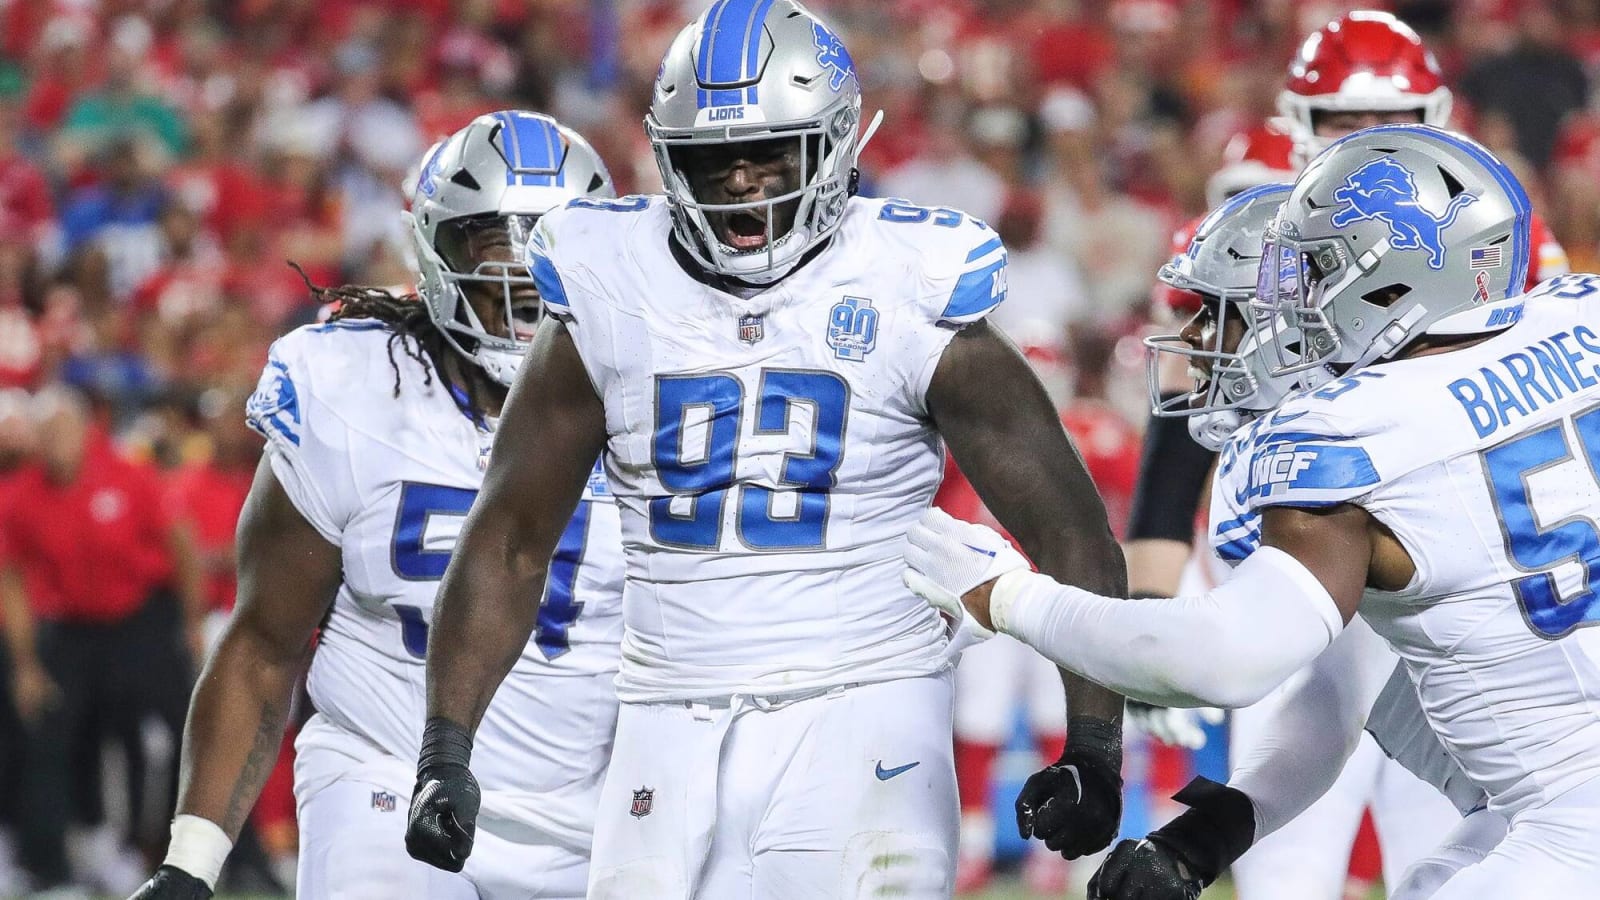 Detroit Lions Friday Injury Report: Decker Doubtful, Paschal, Moseley Out